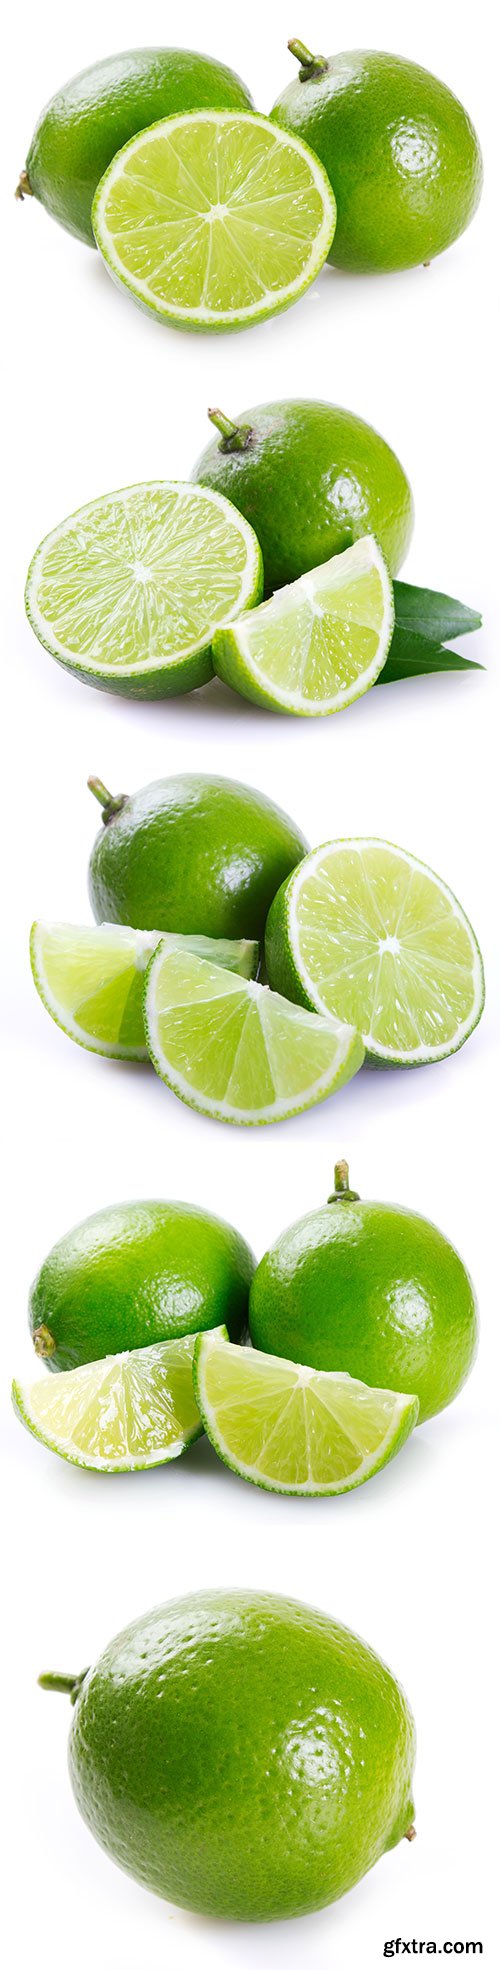 Lime Isolated - 7xJPGs